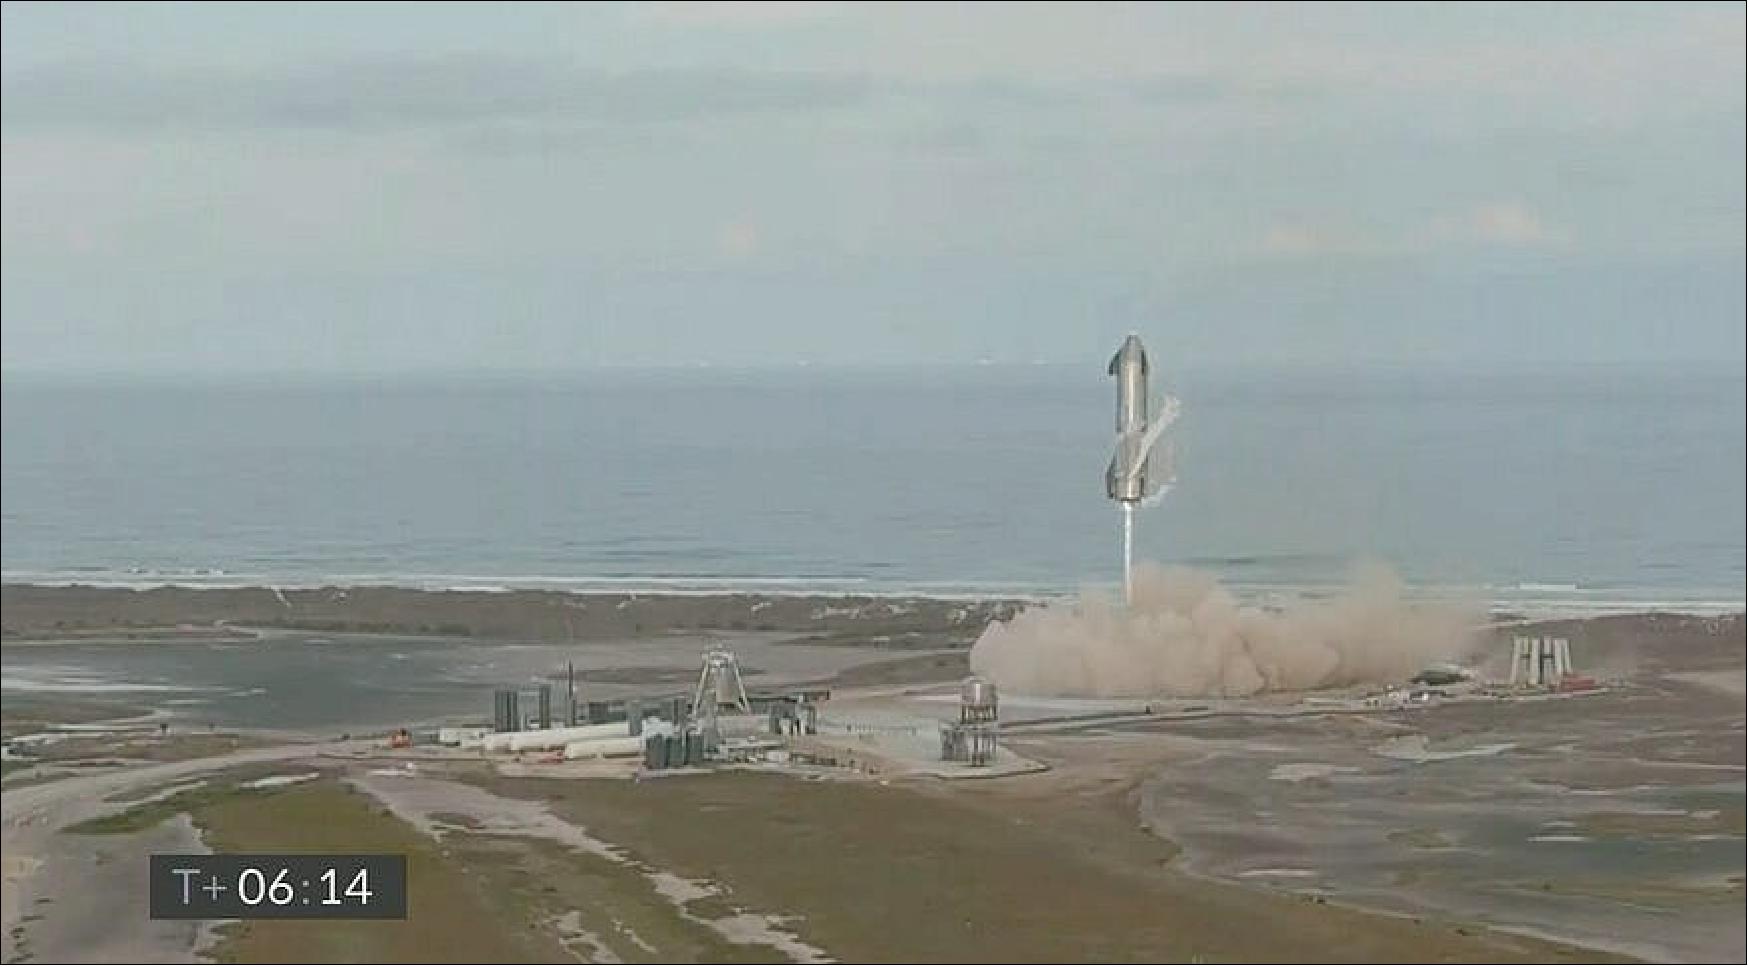 Figure 23: SpaceX's Starship SN10 prototype prepares to land after a flight to 10 km. The vehicle landed intact, only to explode minutes later (image credit: SpaceX)